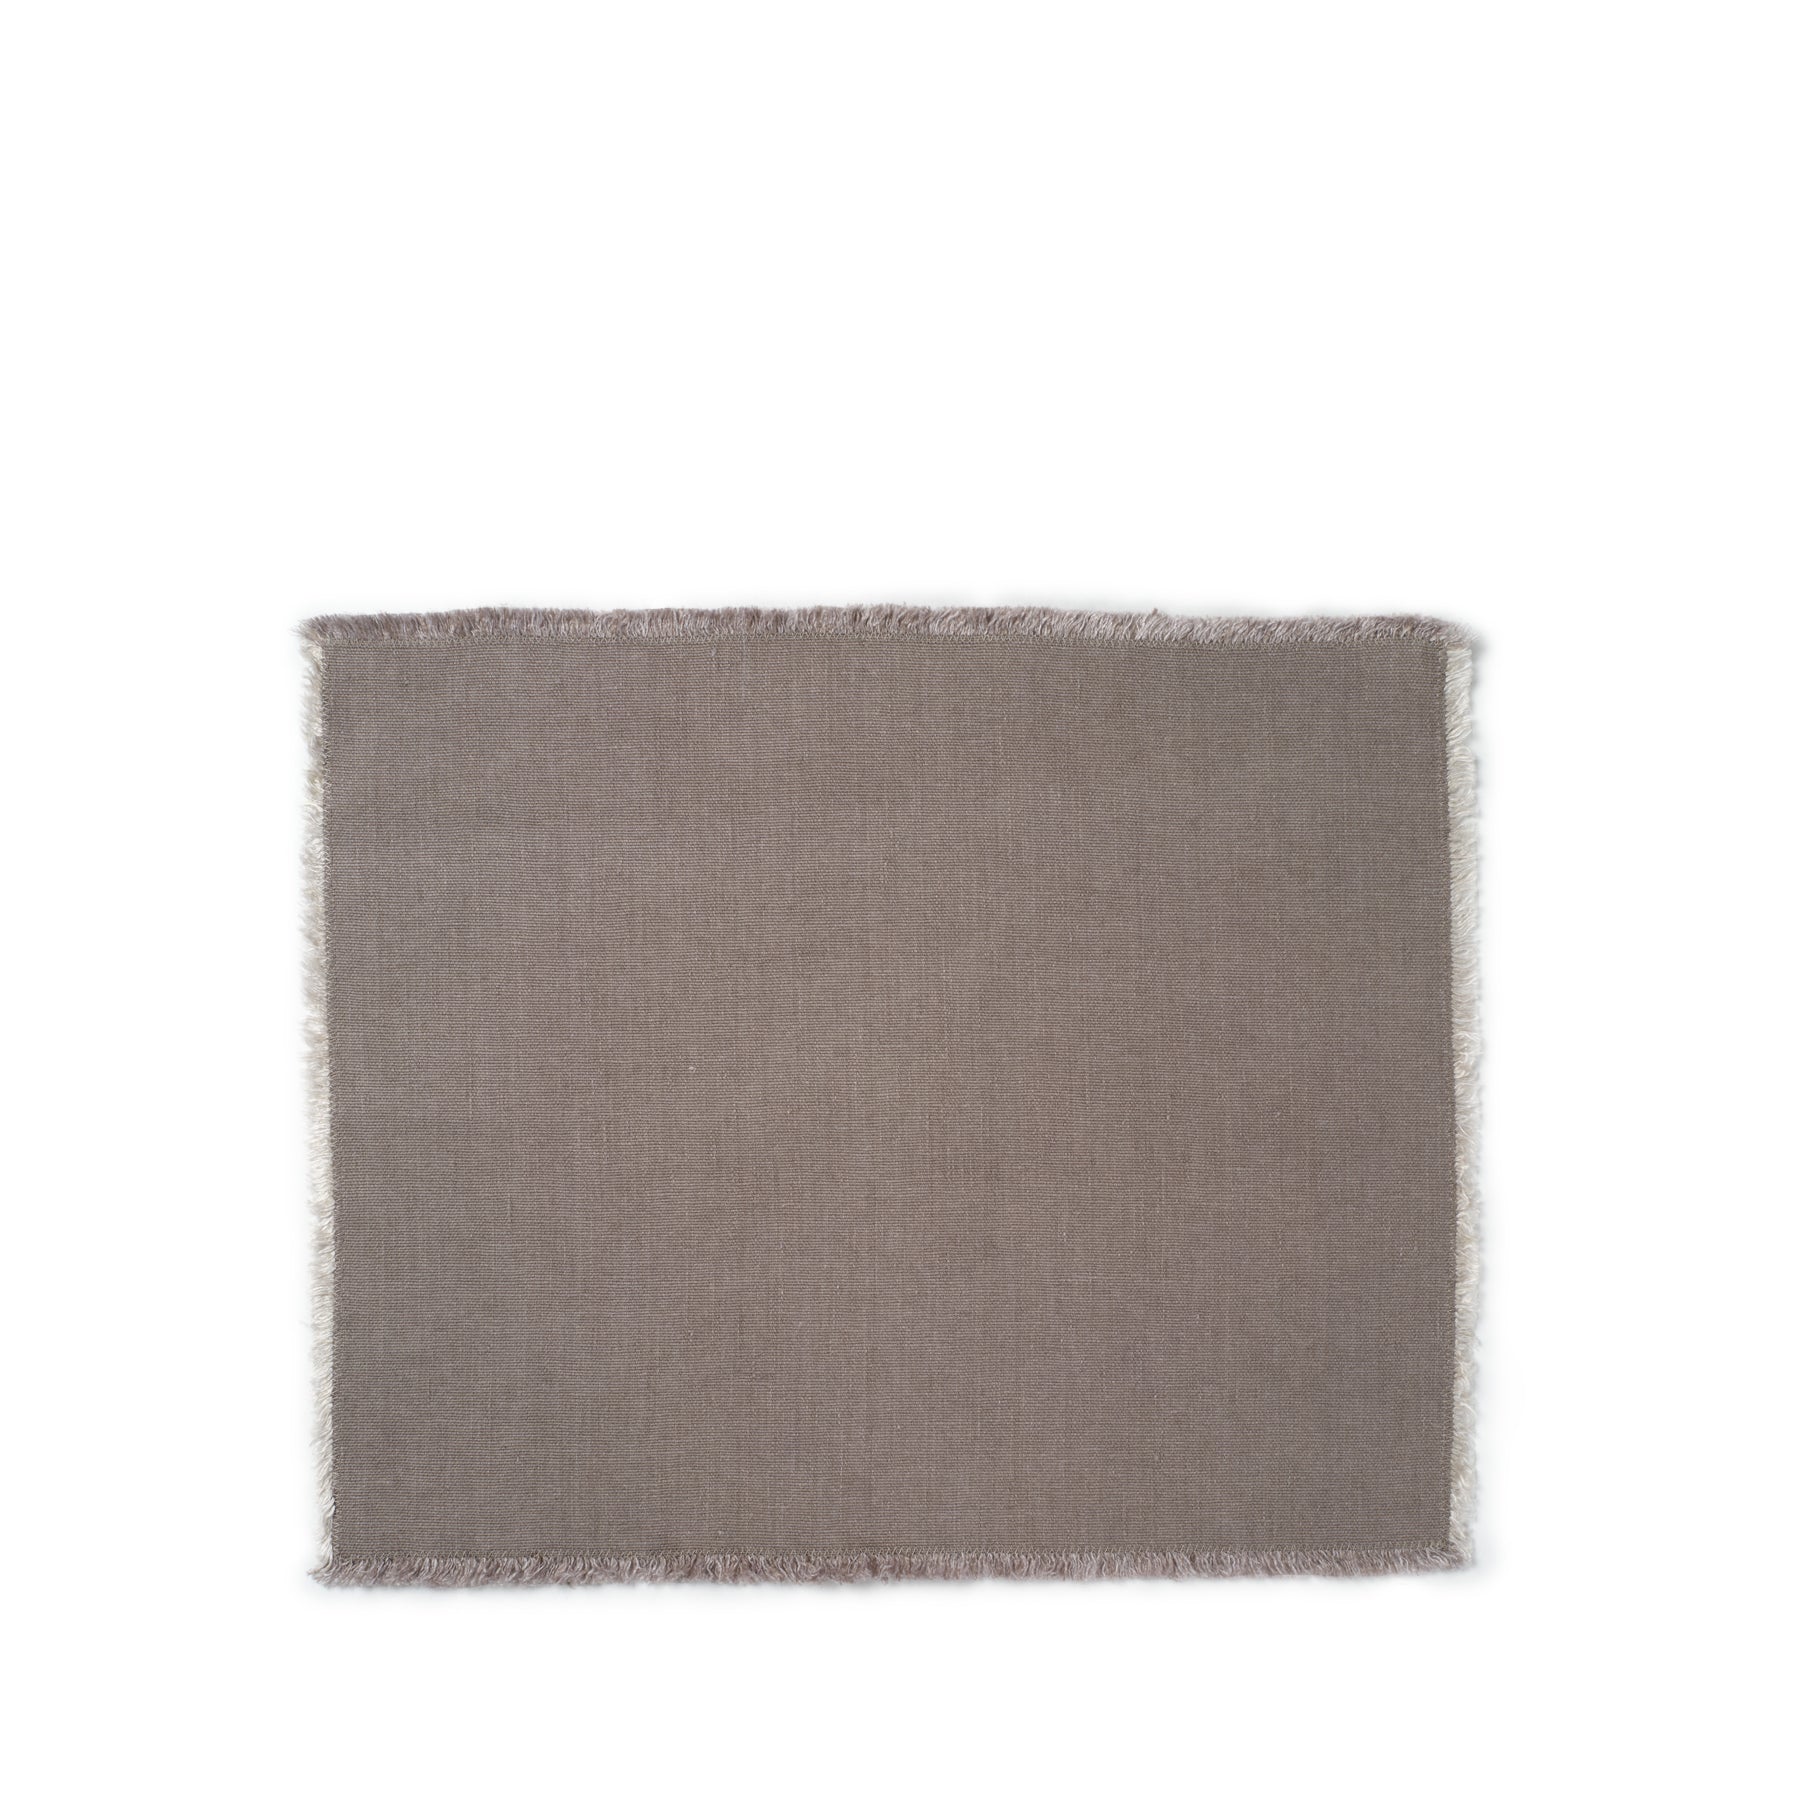 Hopsack Linen Placemat in Warm Gray (Set of 2) Zoom Image 1